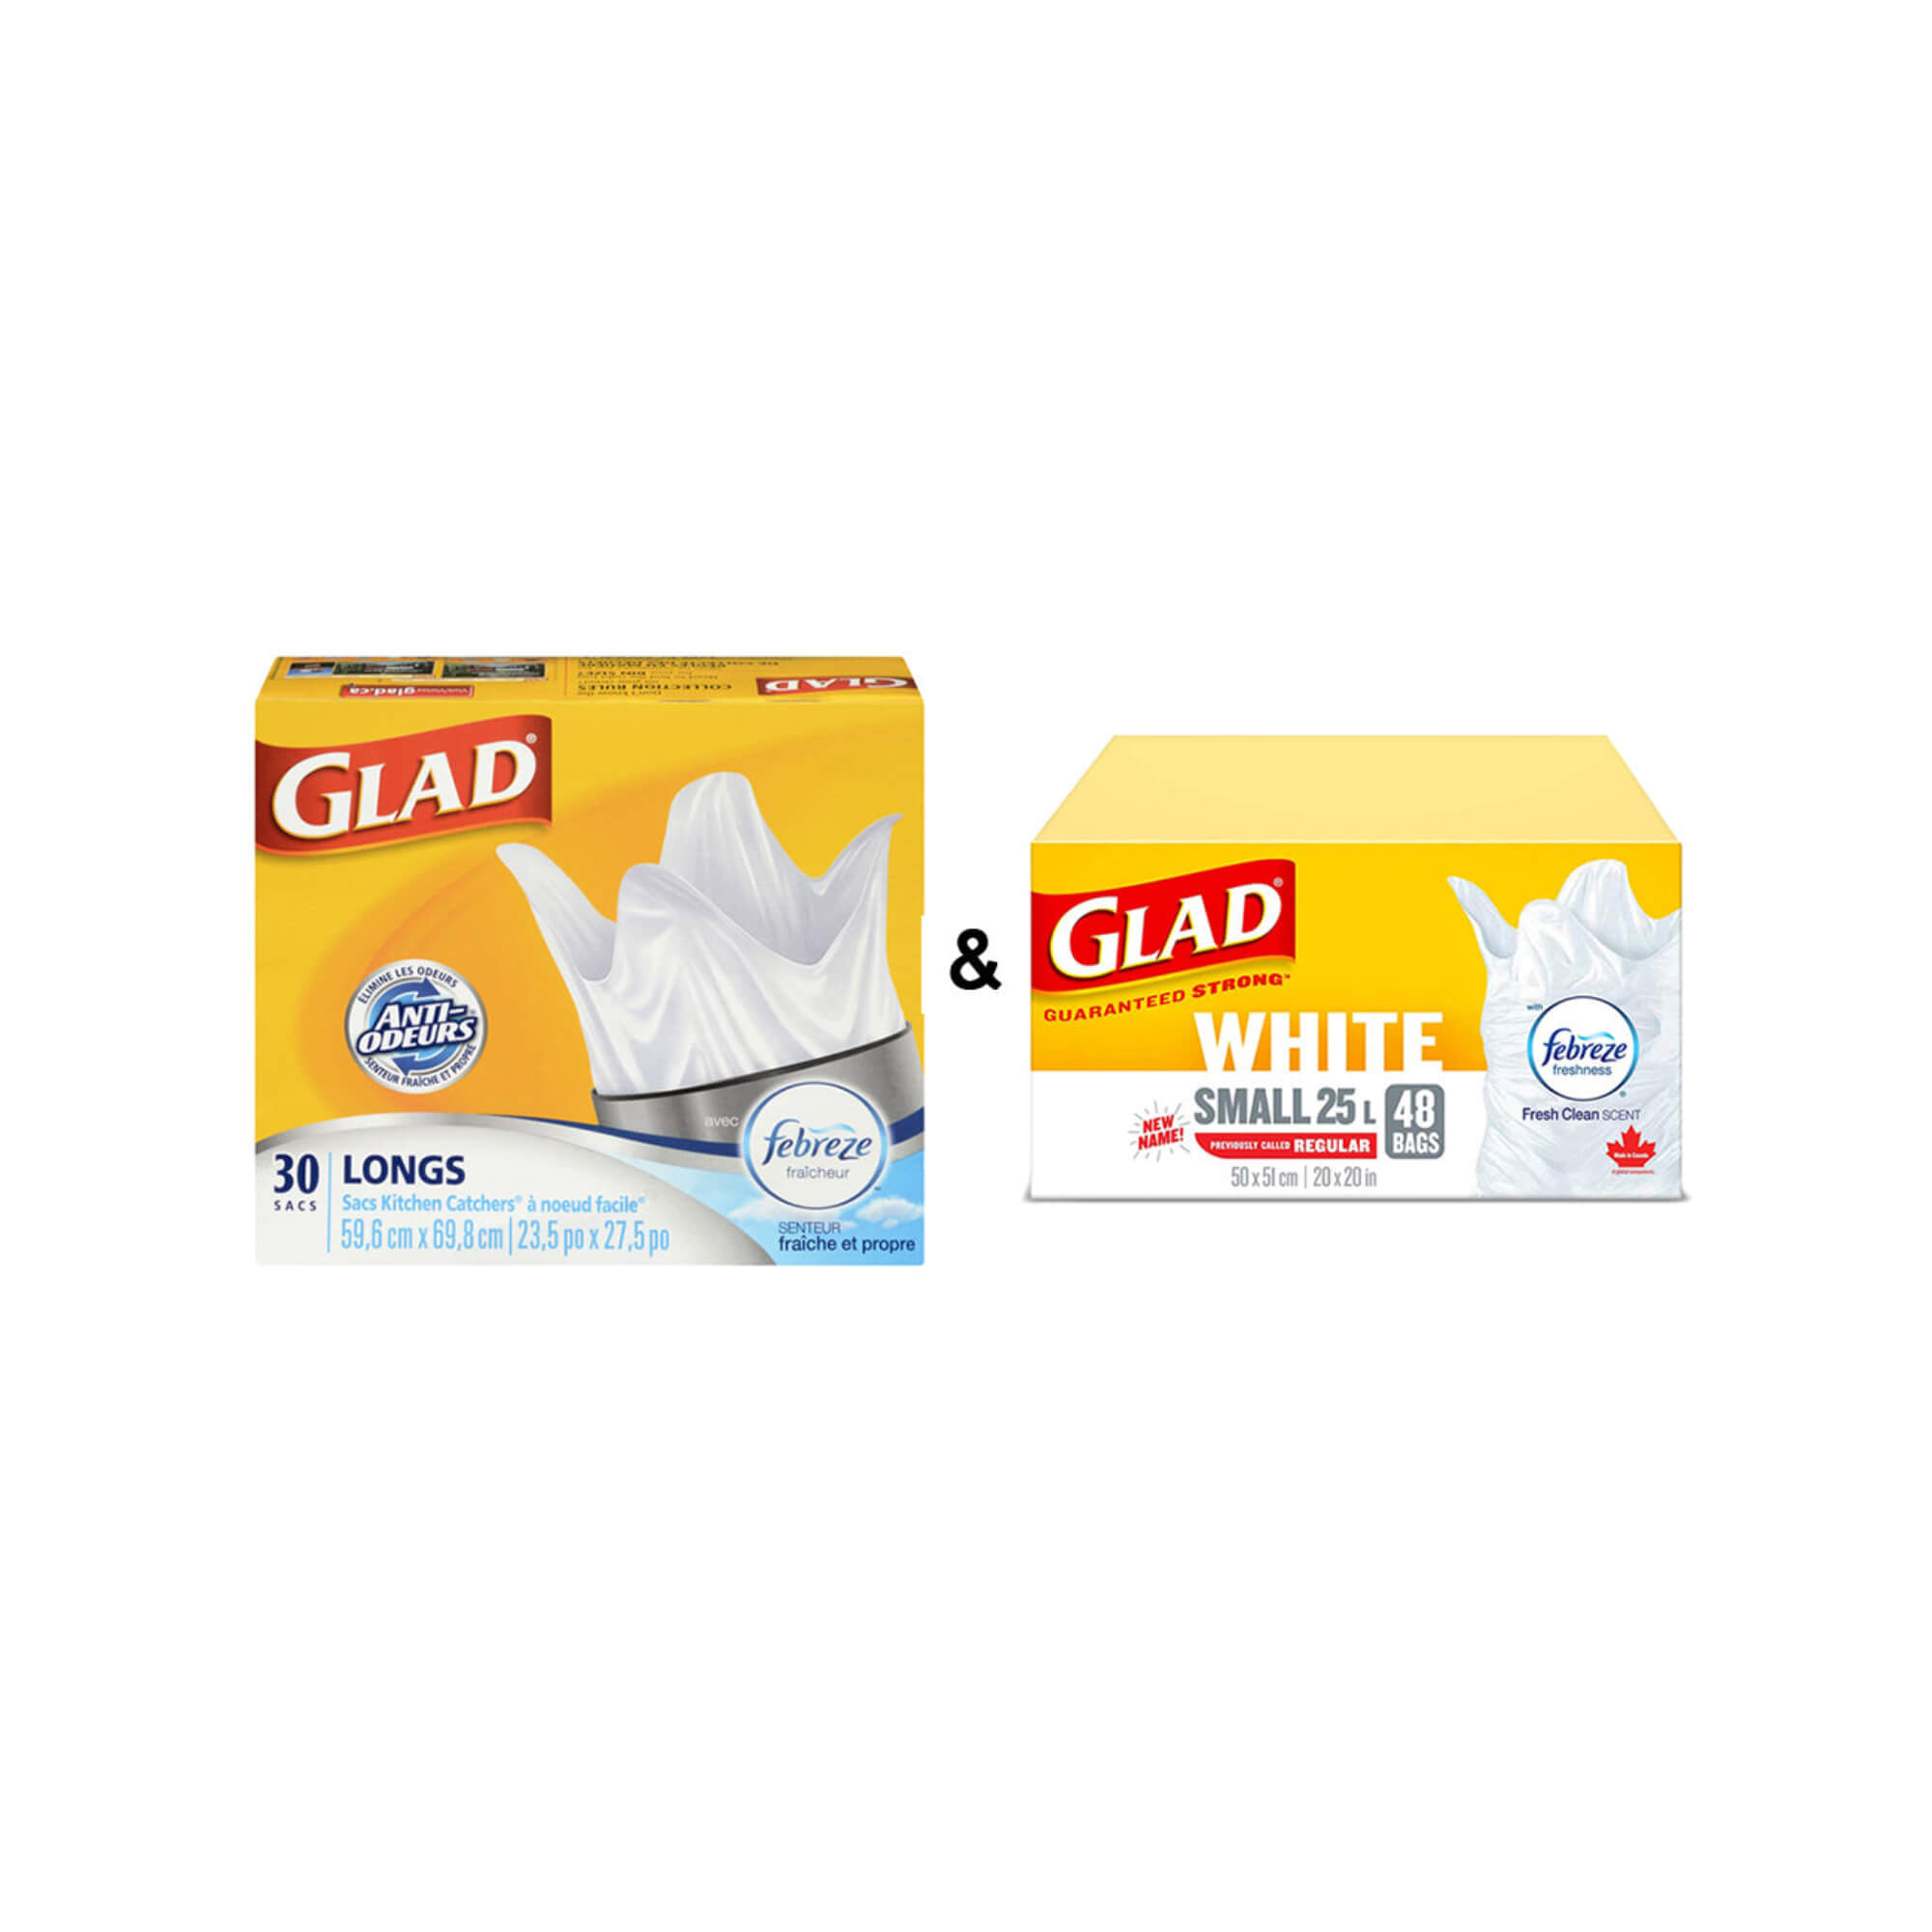 Glad White Garbage Bags, Tall+Glad White Garbage Bags, Small